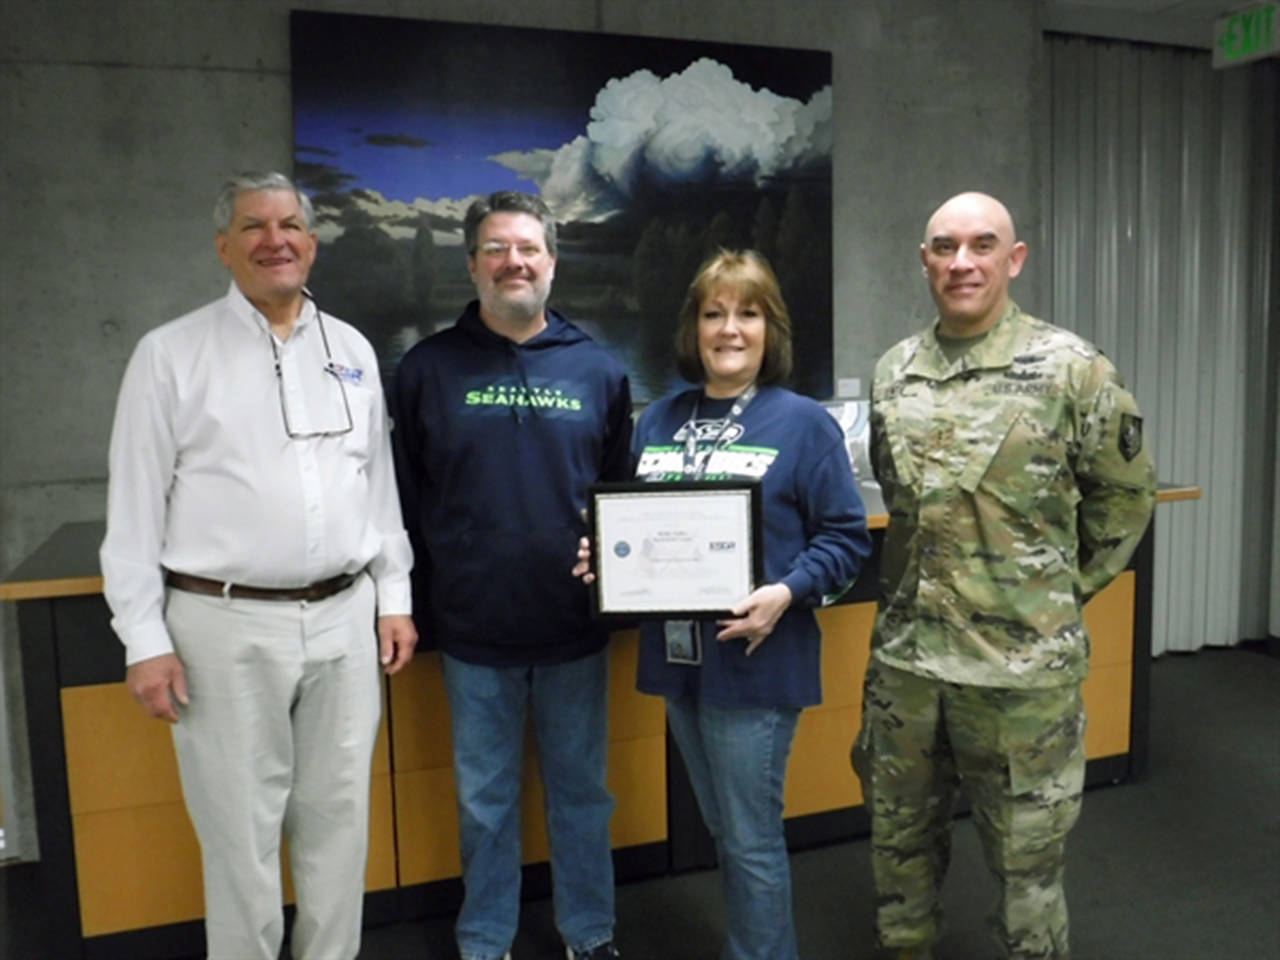 Holly Faller (with certificate), a Snohomish County planning department supervisor, was recognized on Jan. 4 for her support of employees who serve in the military. She was nominated by Dave Lente (far right), an Army reservist who works in her office. (Snohomish County)